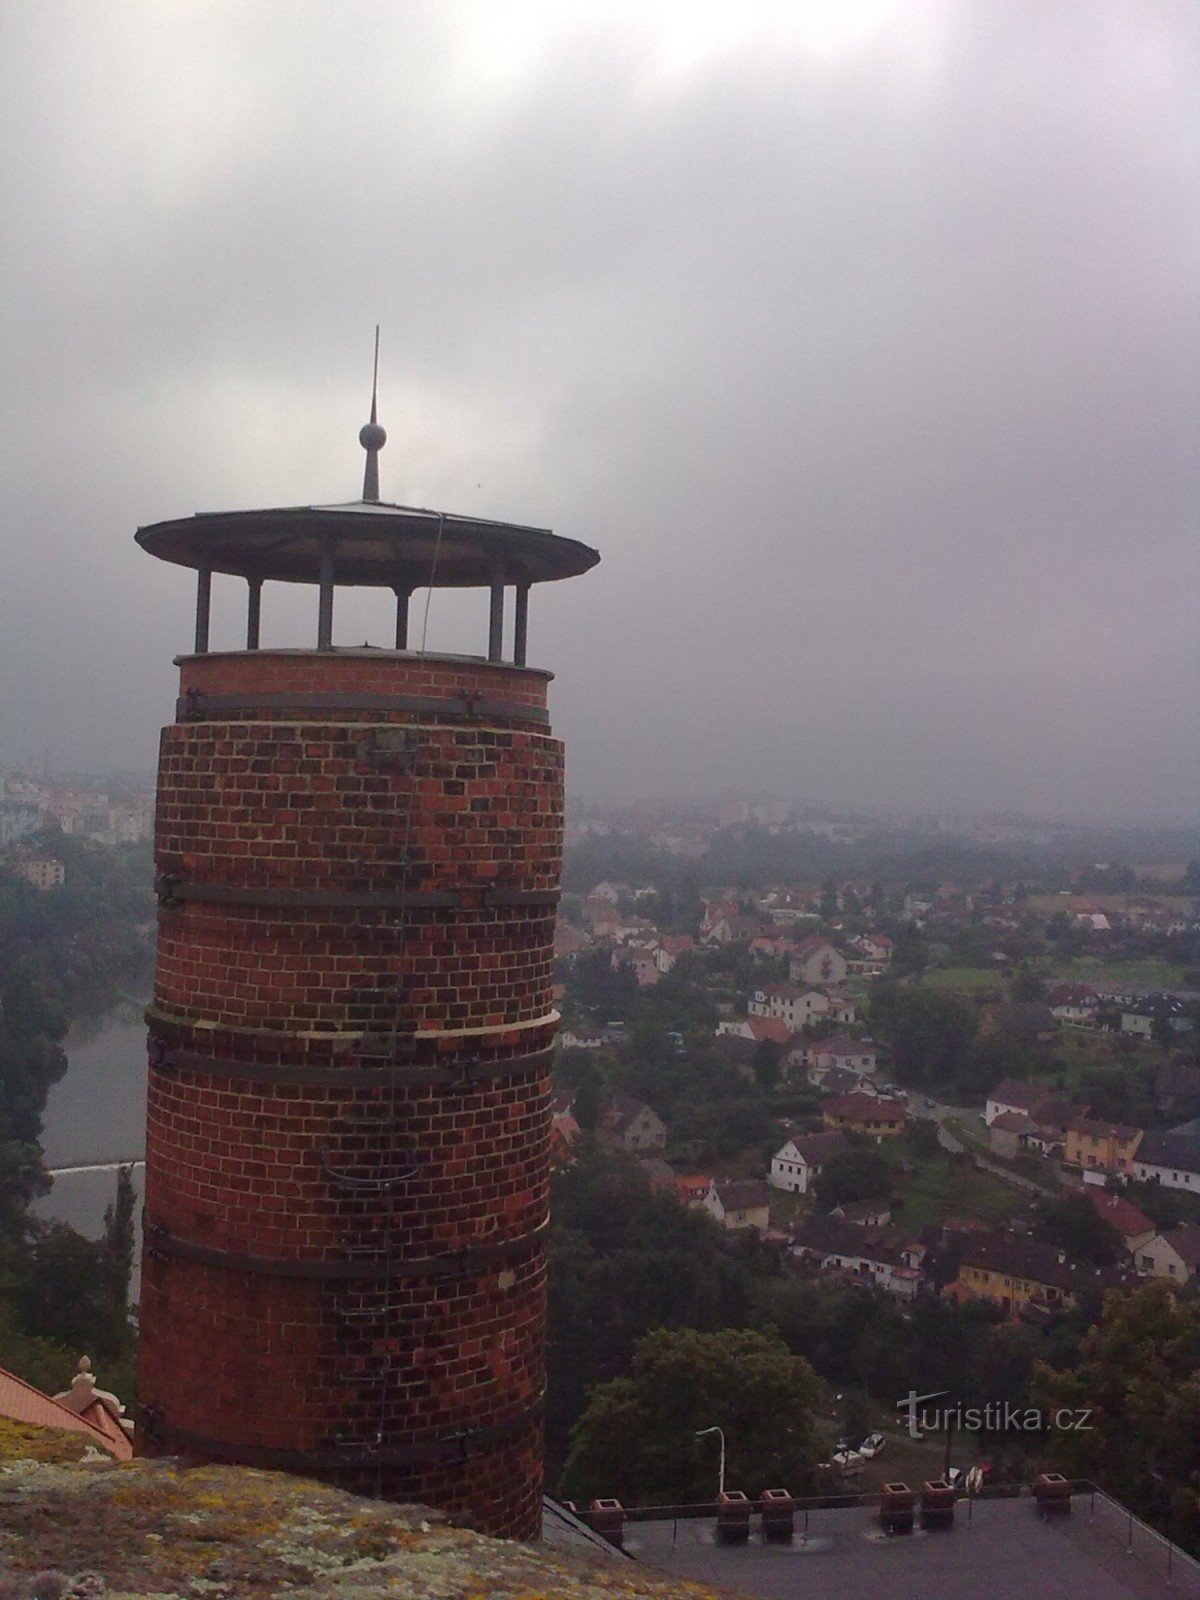 View from Kotnov to the chimney and clouds